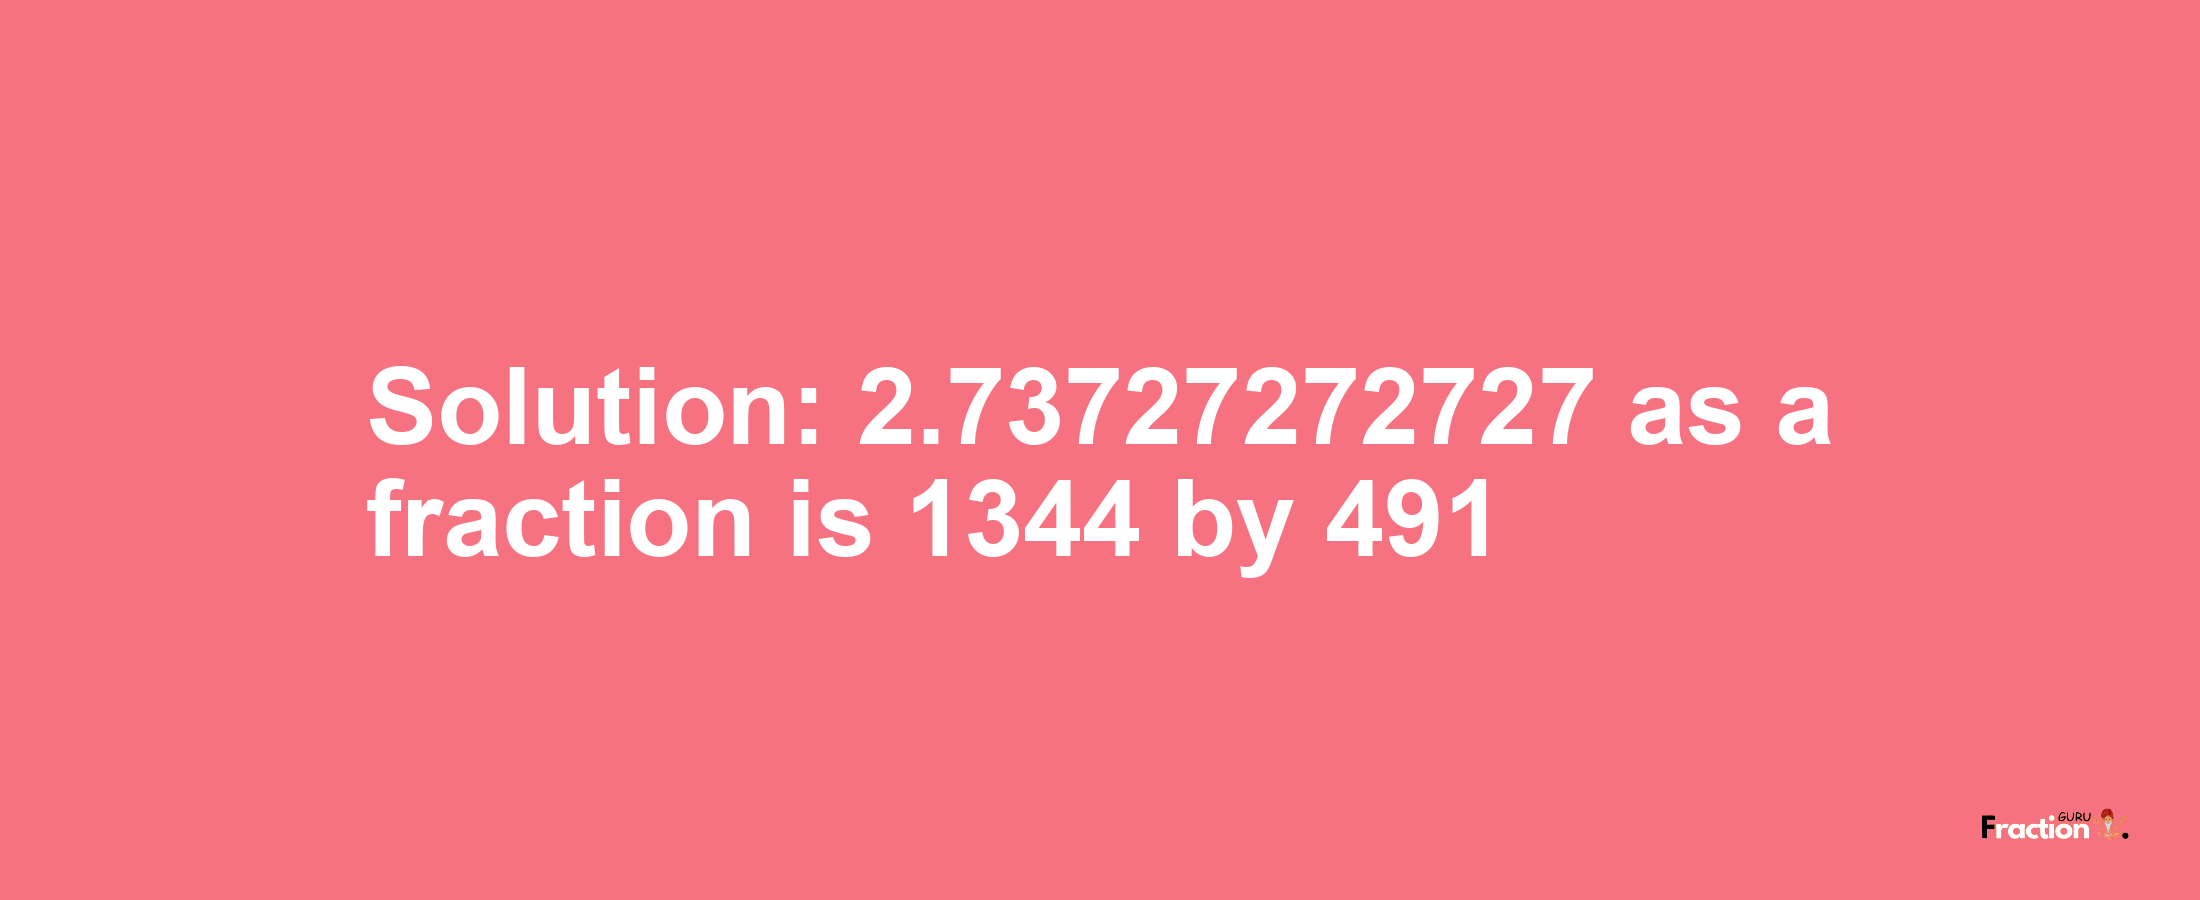 Solution:2.73727272727 as a fraction is 1344/491